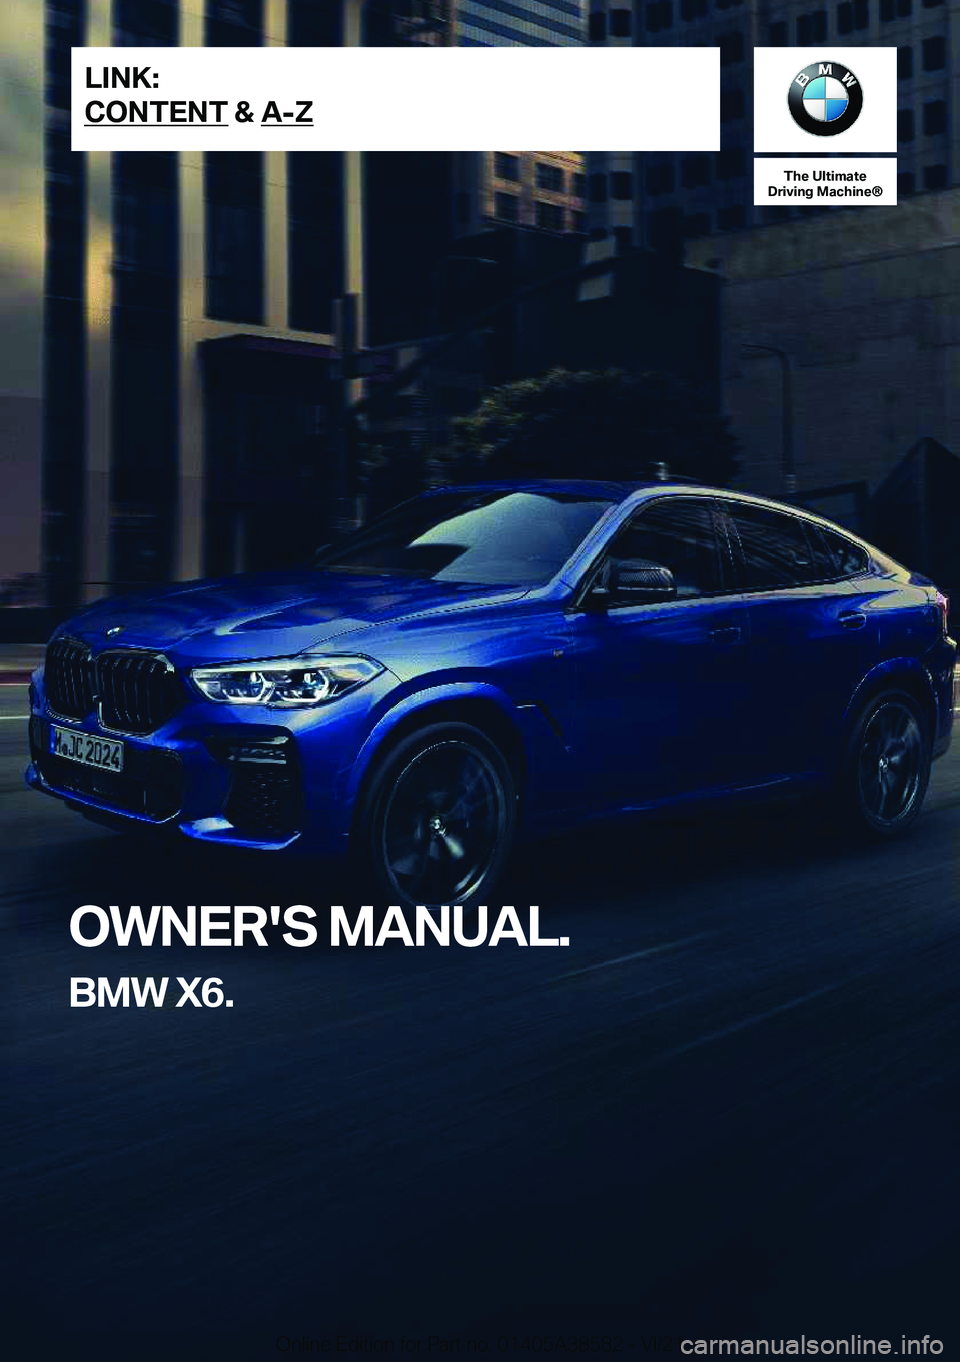 BMW X6 2022  Owners Manual �T�h�e��U�l�t�i�m�a�t�e
�D�r�i�v�i�n�g��M�a�c�h�i�n�e�n
�O�W�N�E�R�'�S��M�A�N�U�A�L�.
�B�M�W��X�6�.�L�I�N�K�:
�C�O�N�T�E�N�T��&��A�-�Z�O�n�l�i�n�e��E�d�i�t�i�o�n��f�o�r��P�a�r�t��n�o�.�